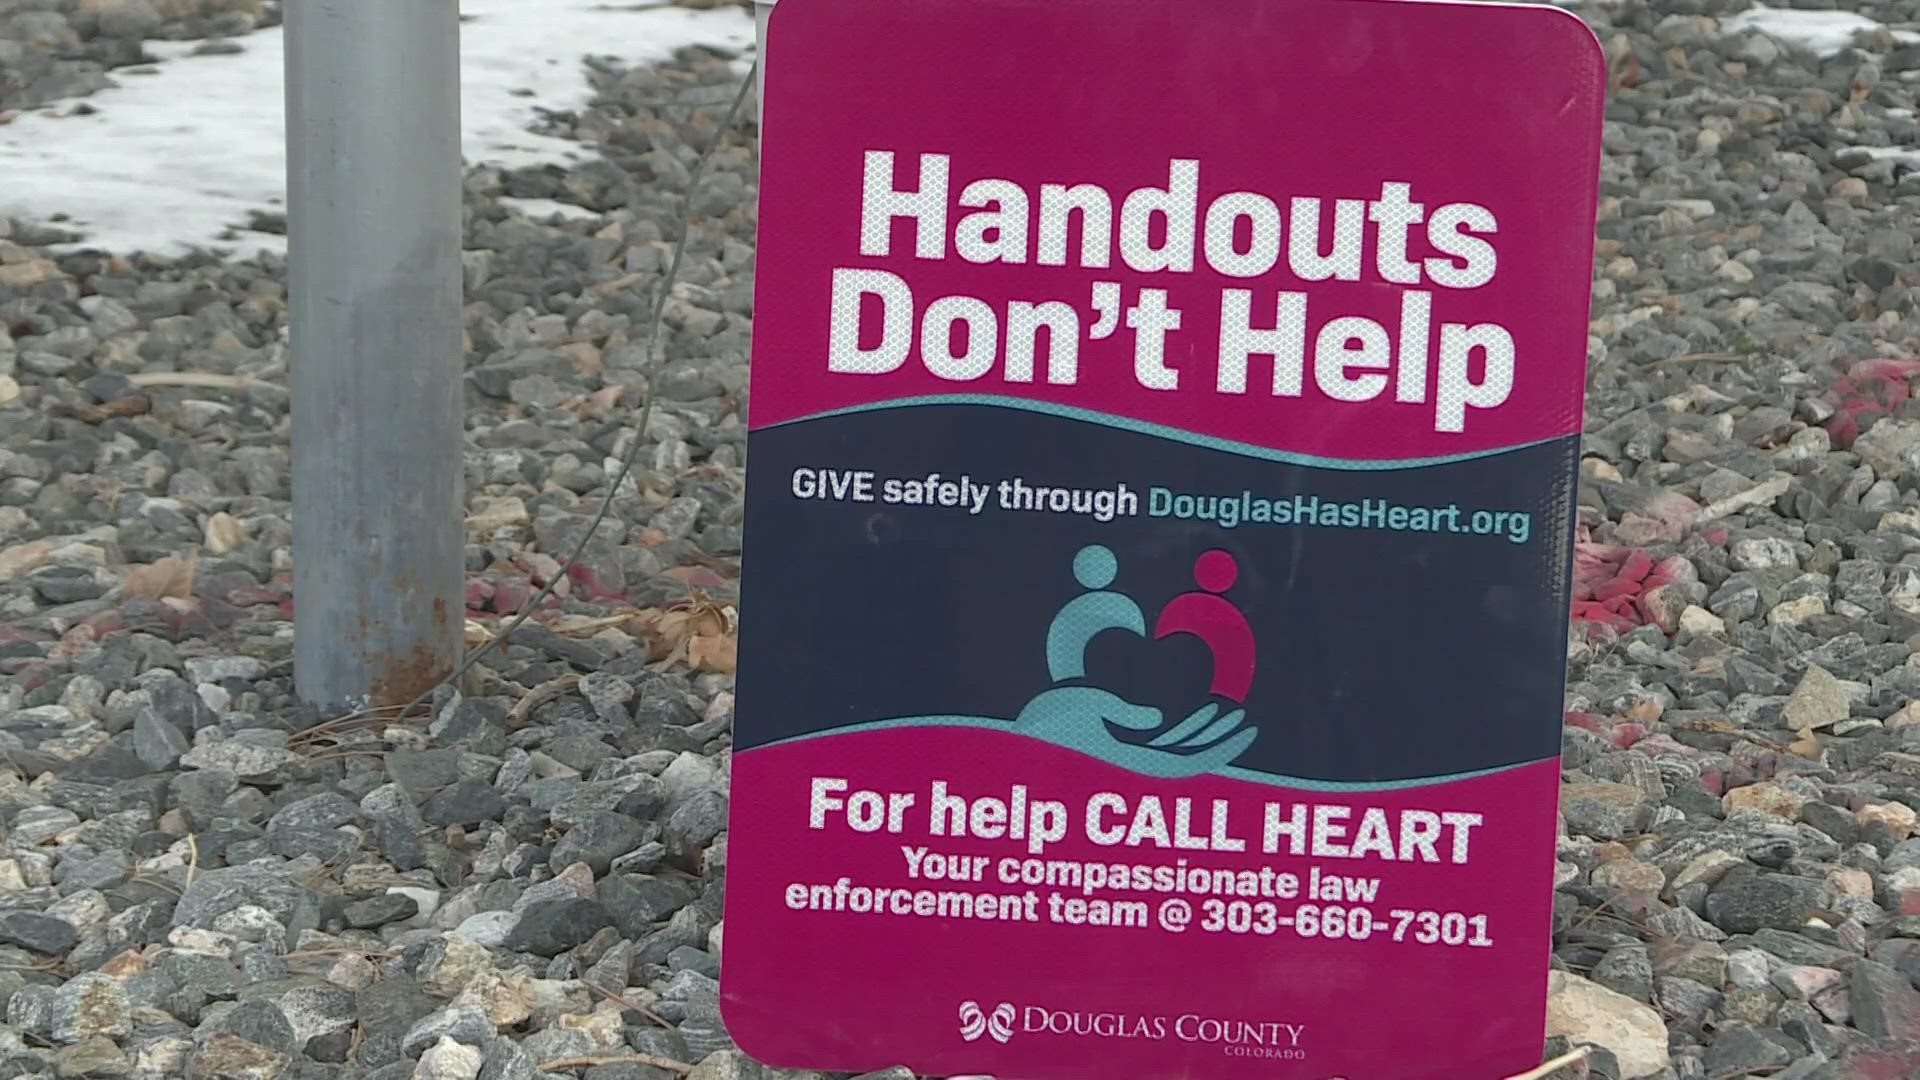 Douglas County is trying to tell people handouts don't help and get them to donate to nonprofits instead. Why? They're citing public safety concerns.